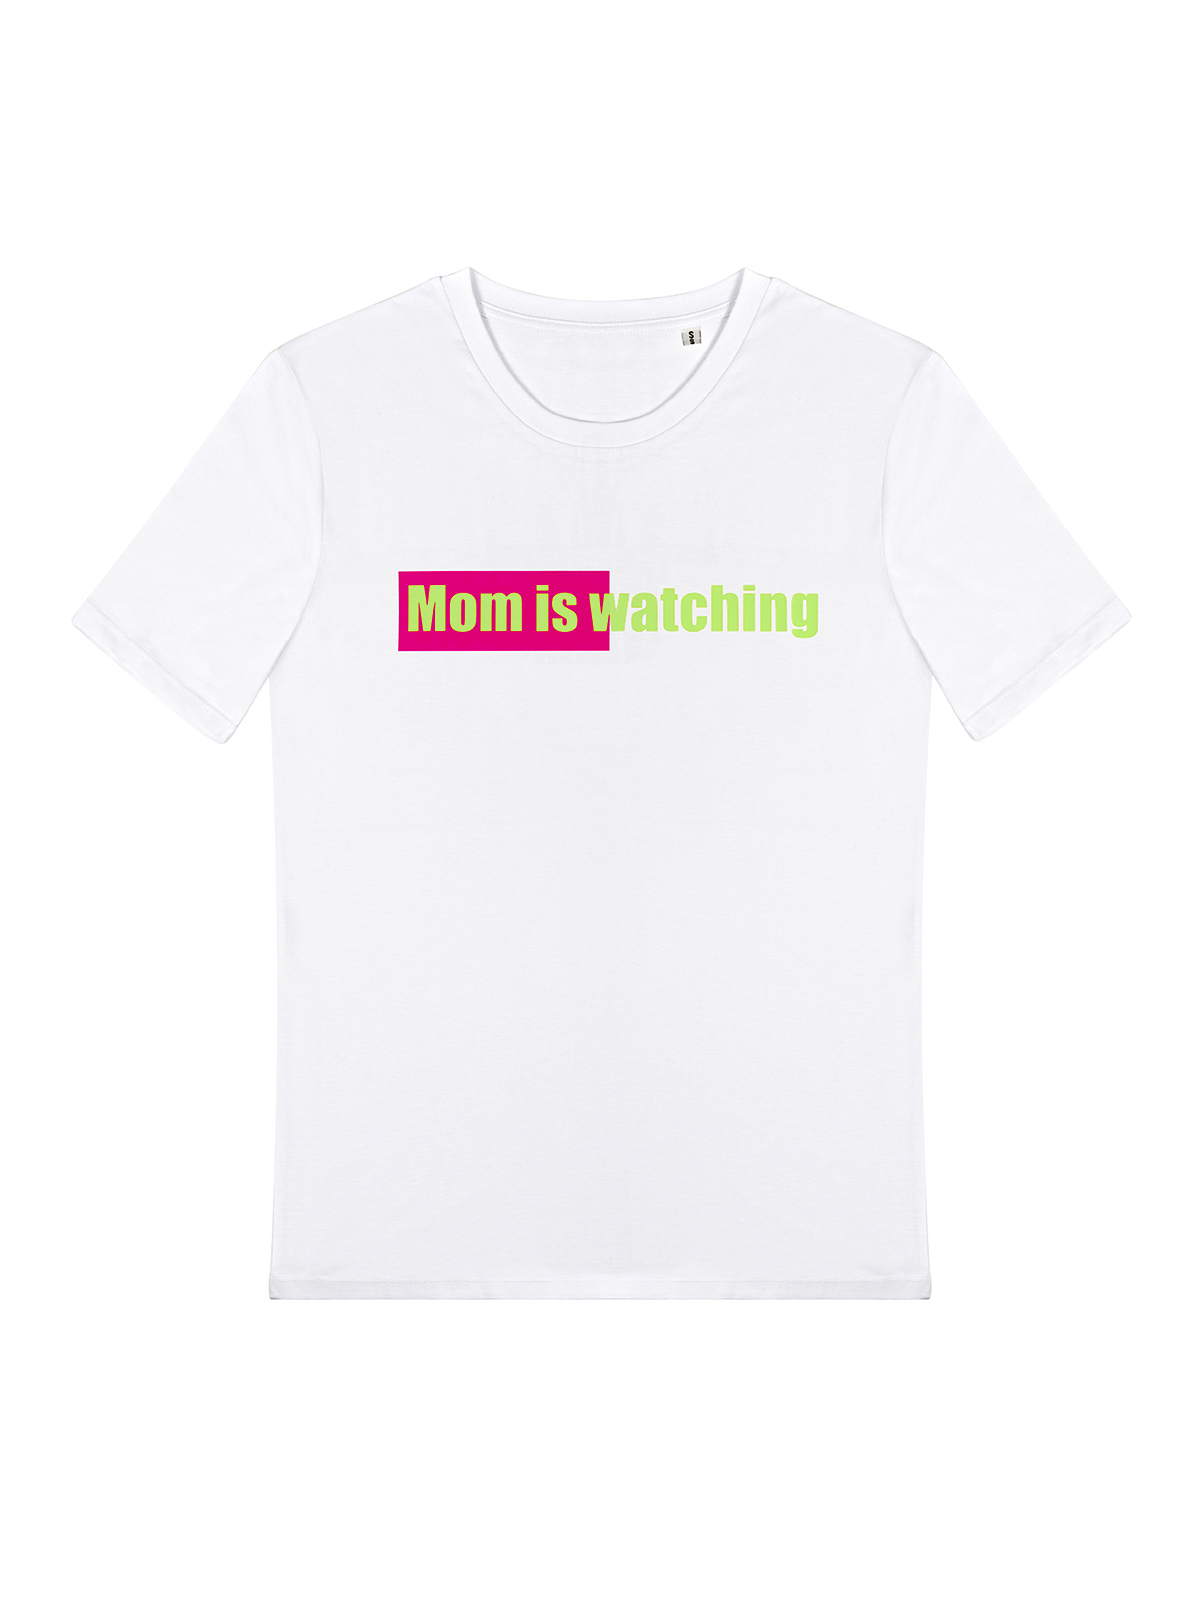 MOM IS WATCHING T-SHIRT